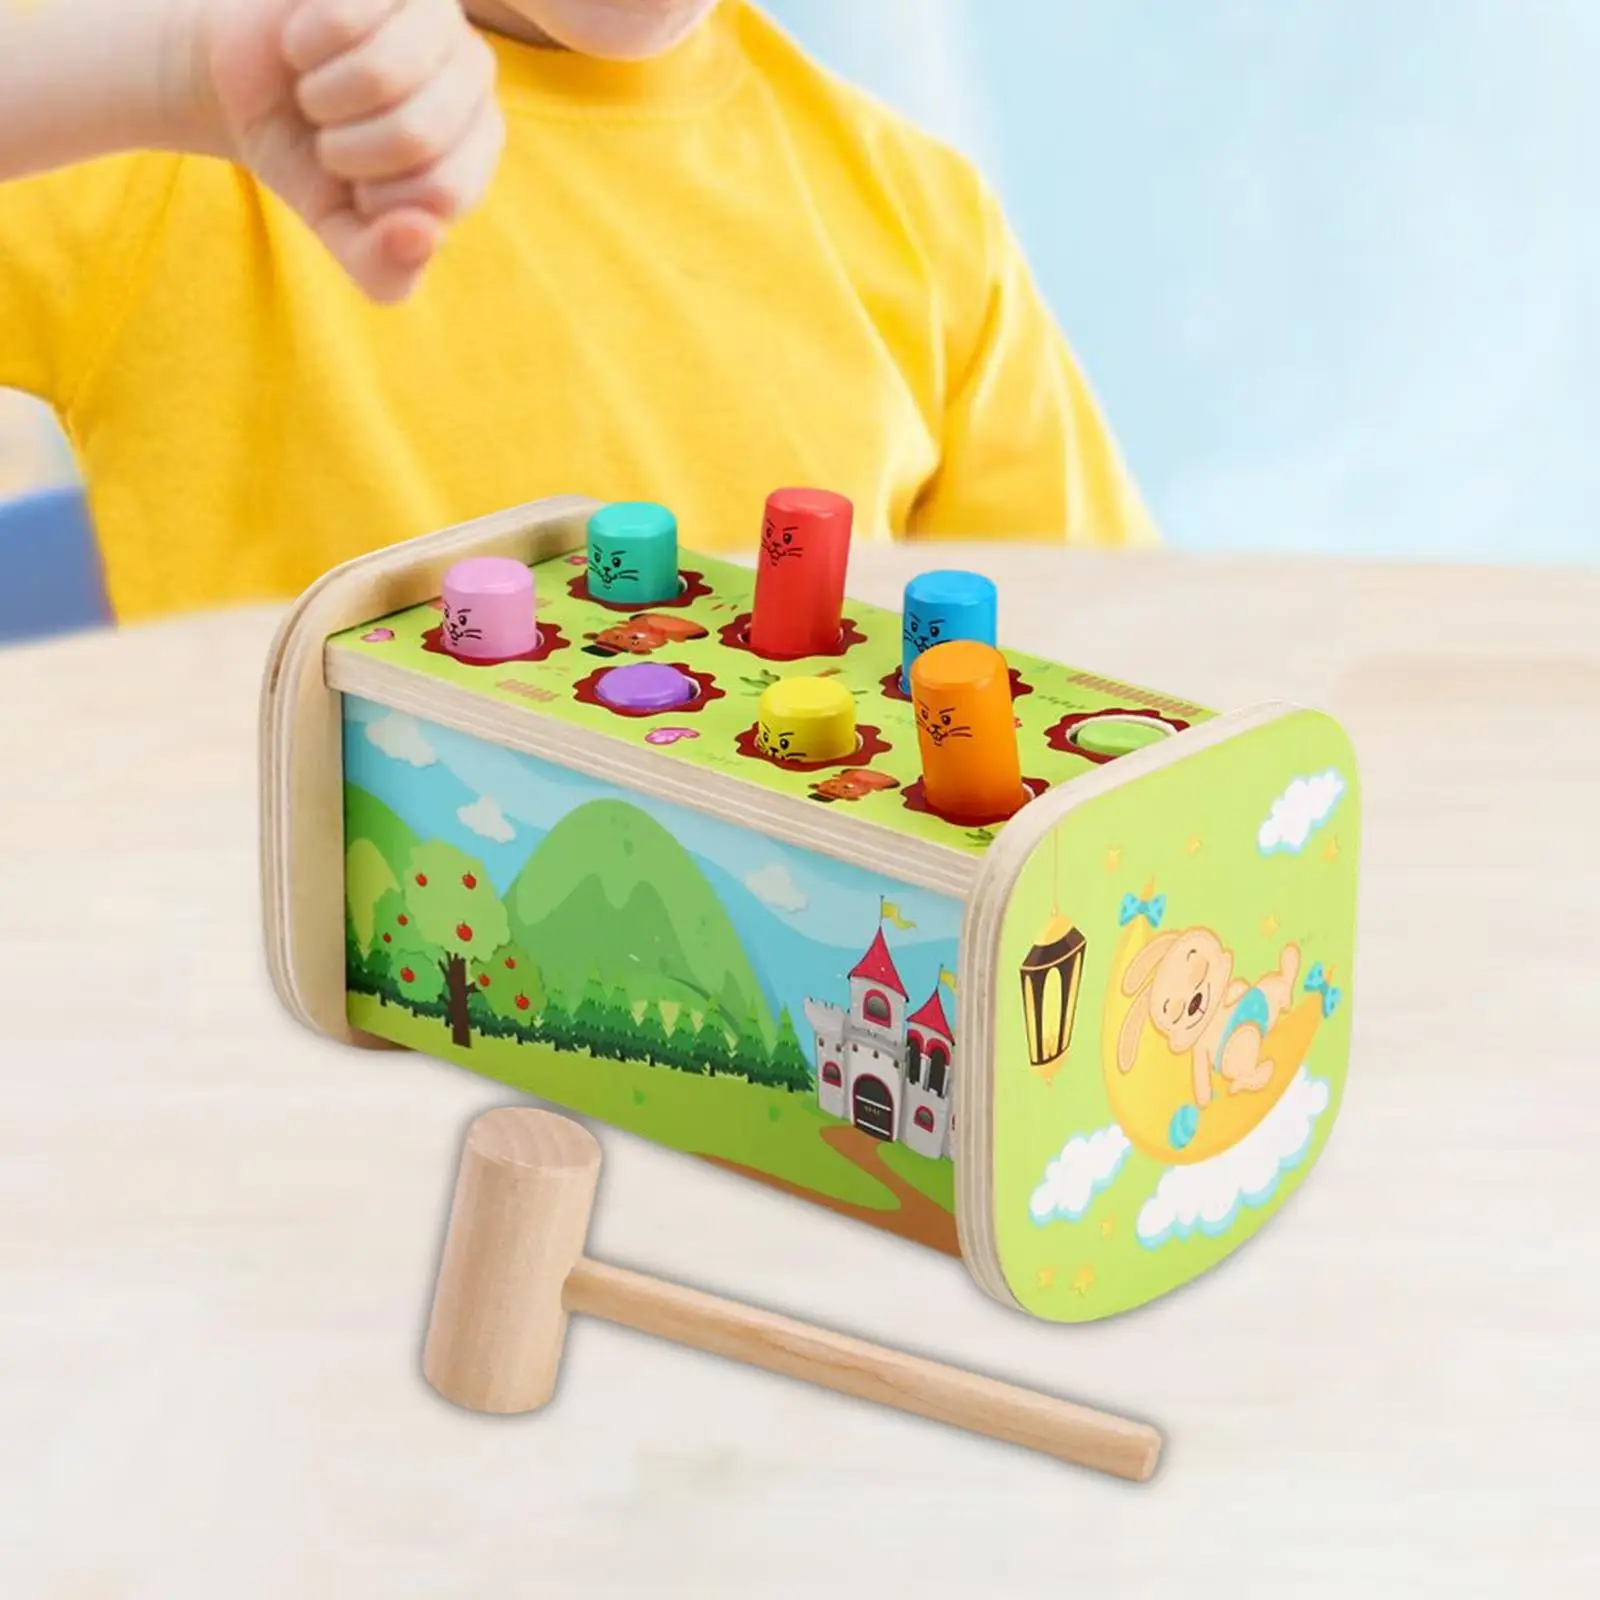 

Fun Pounding Bench Wooden Toy with Mallet Develop Fine Motor Skills for 1 Year Old Girls Boys Kids Children Gifts